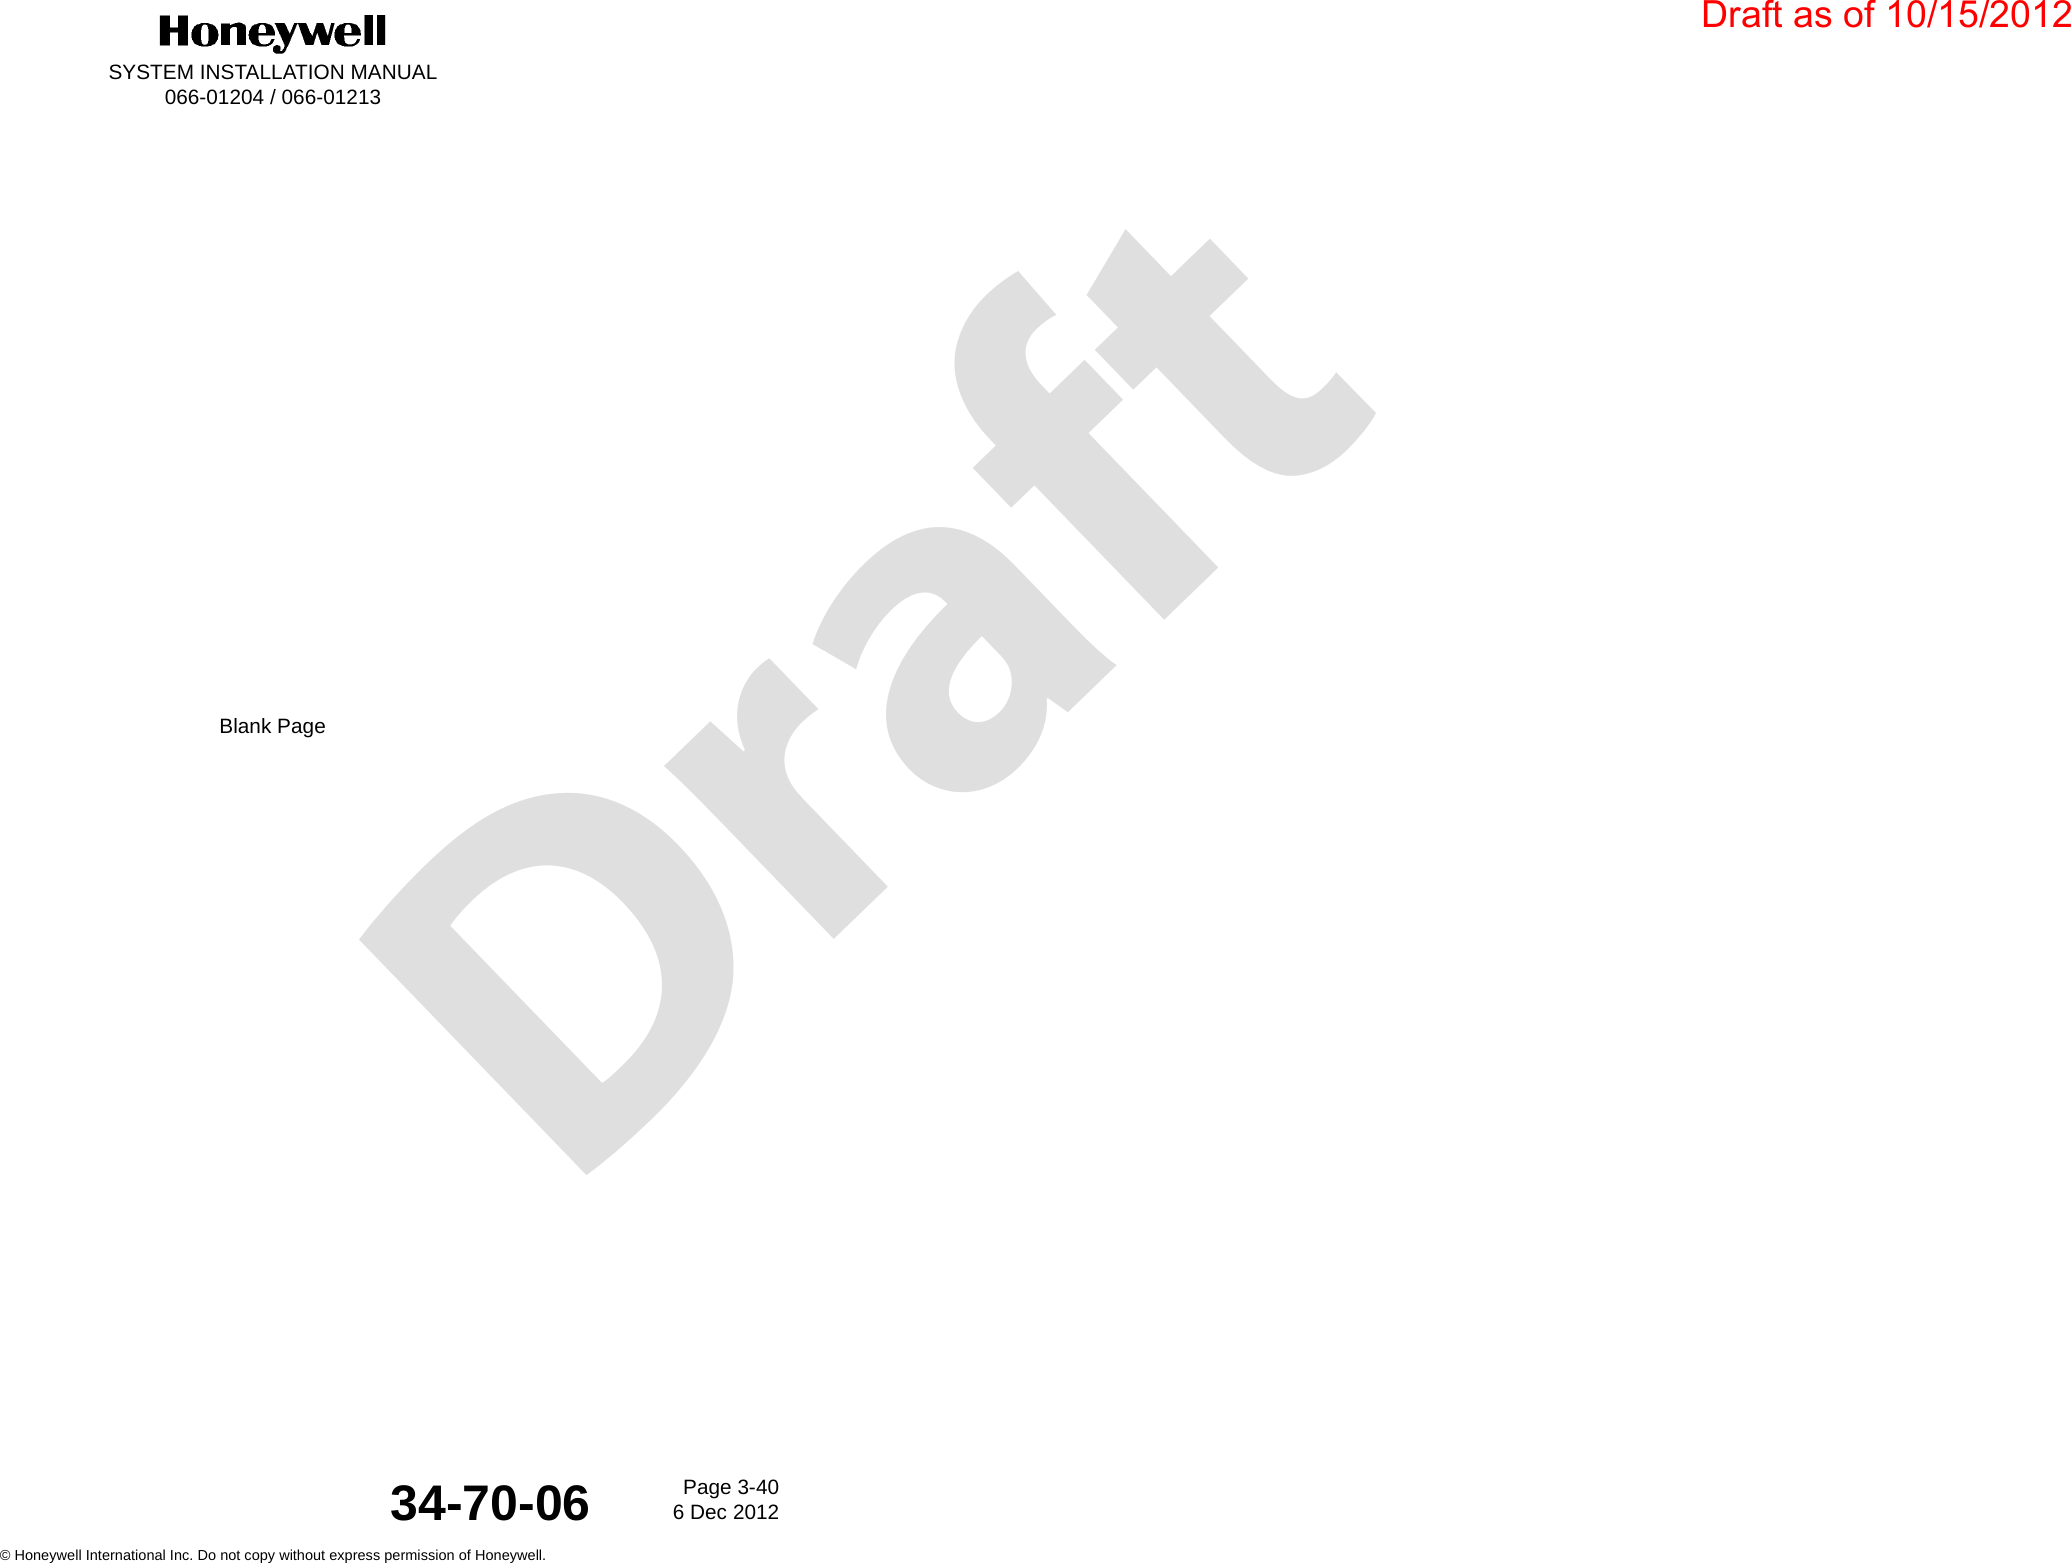 DraftSYSTEM INSTALLATION MANUAL066-01204 / 066-01213Page 3-406 Dec 2012© Honeywell International Inc. Do not copy without express permission of Honeywell.34-70-06Blank PageDraft as of 10/15/2012